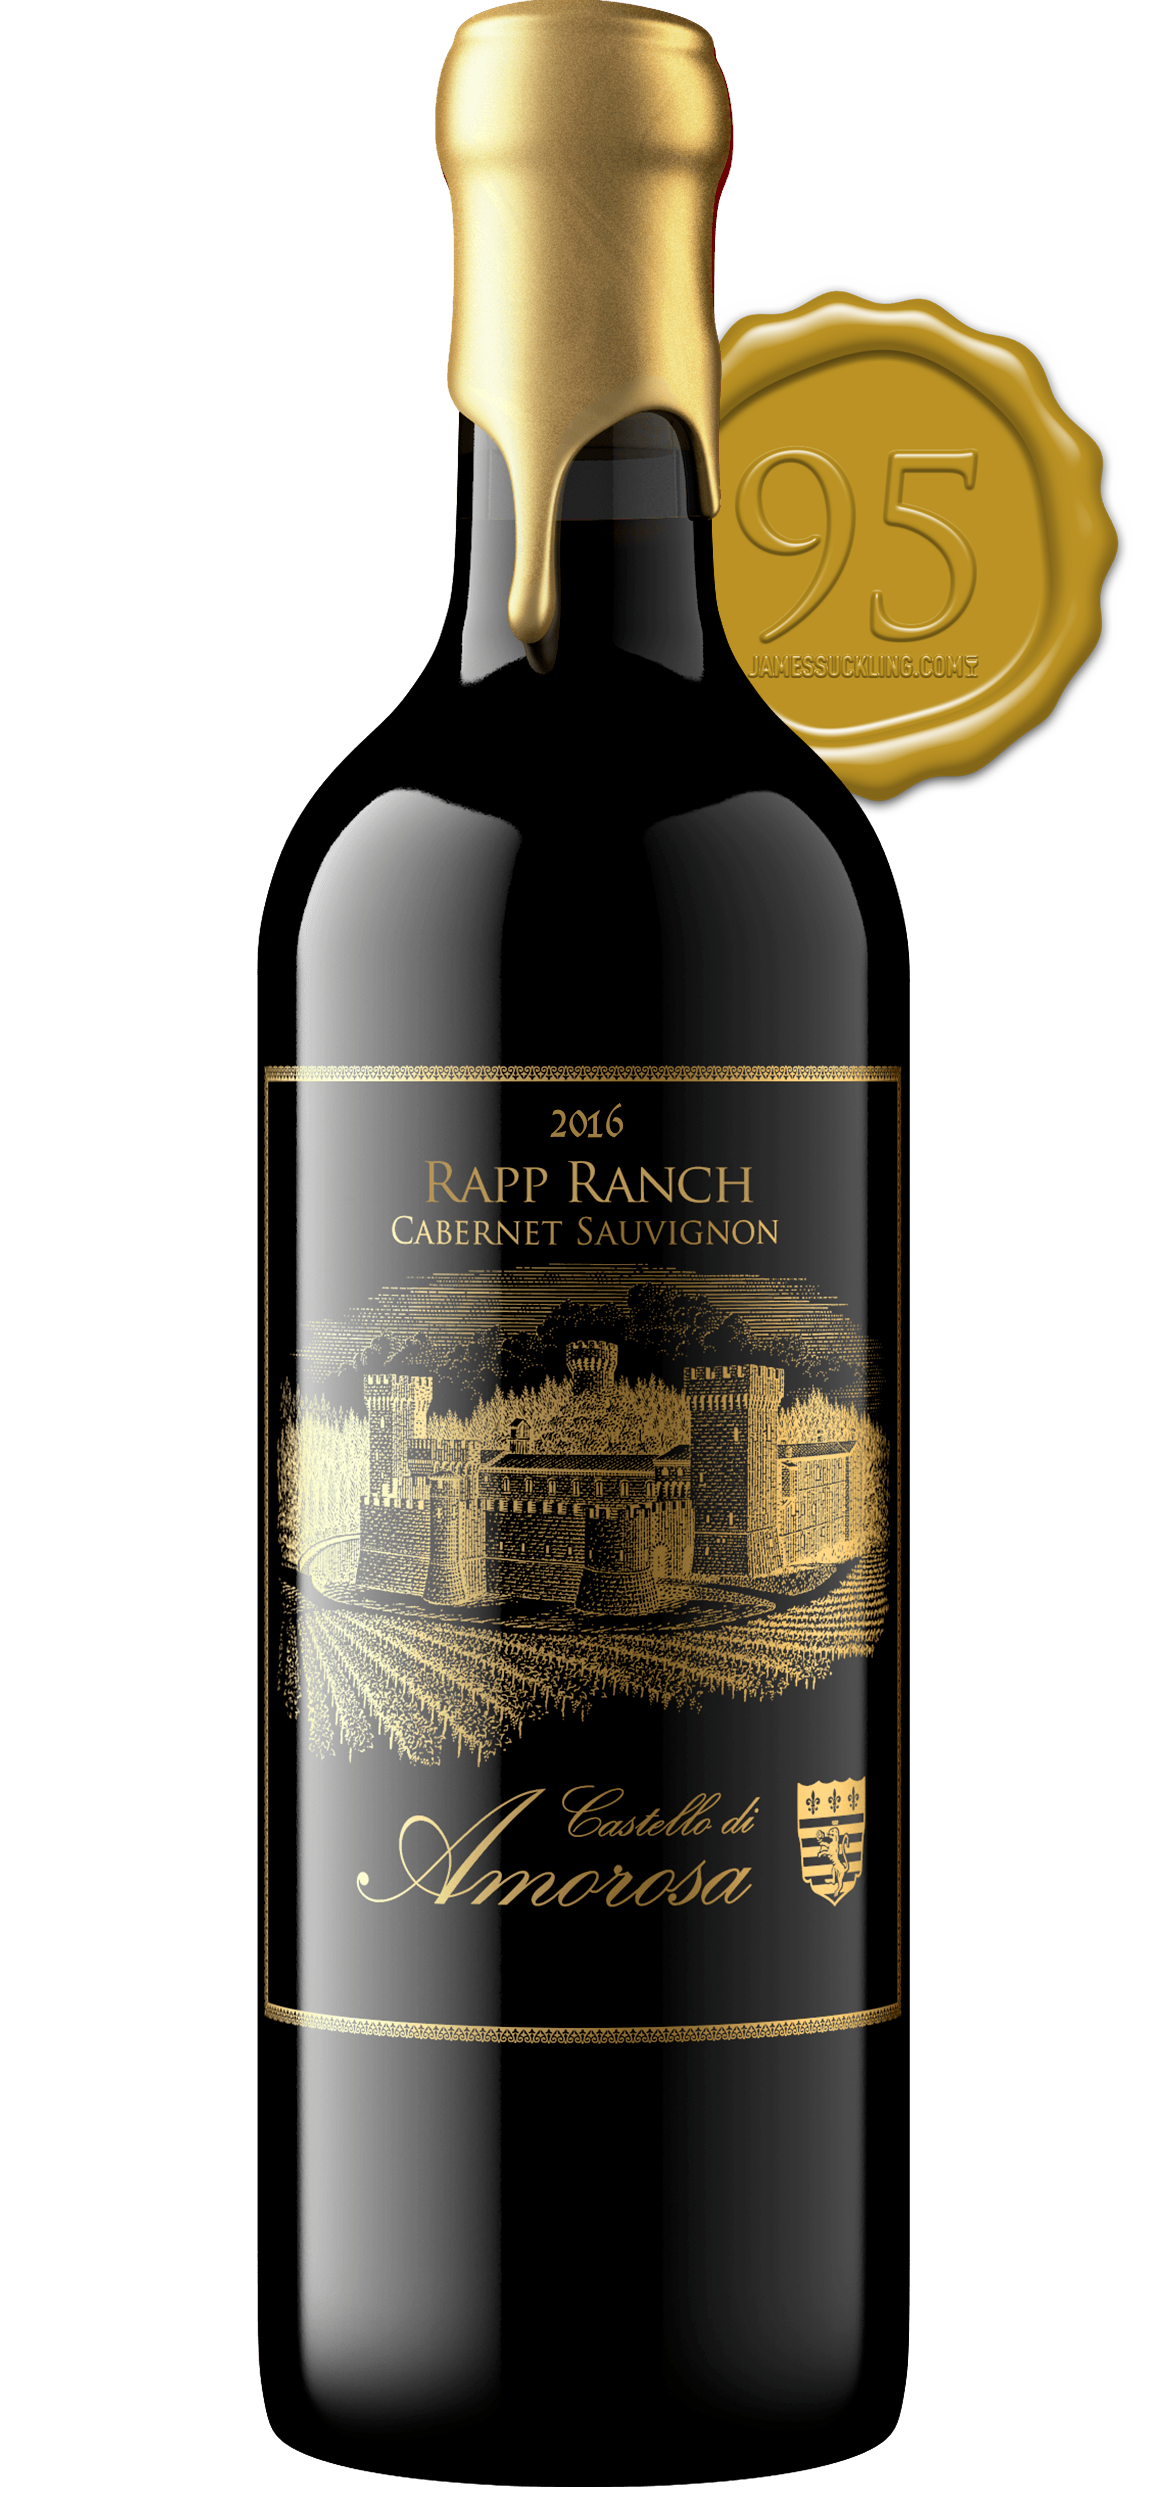 Our Rapp Ranch Cabernet Sauvignon was awarded 95 Points.